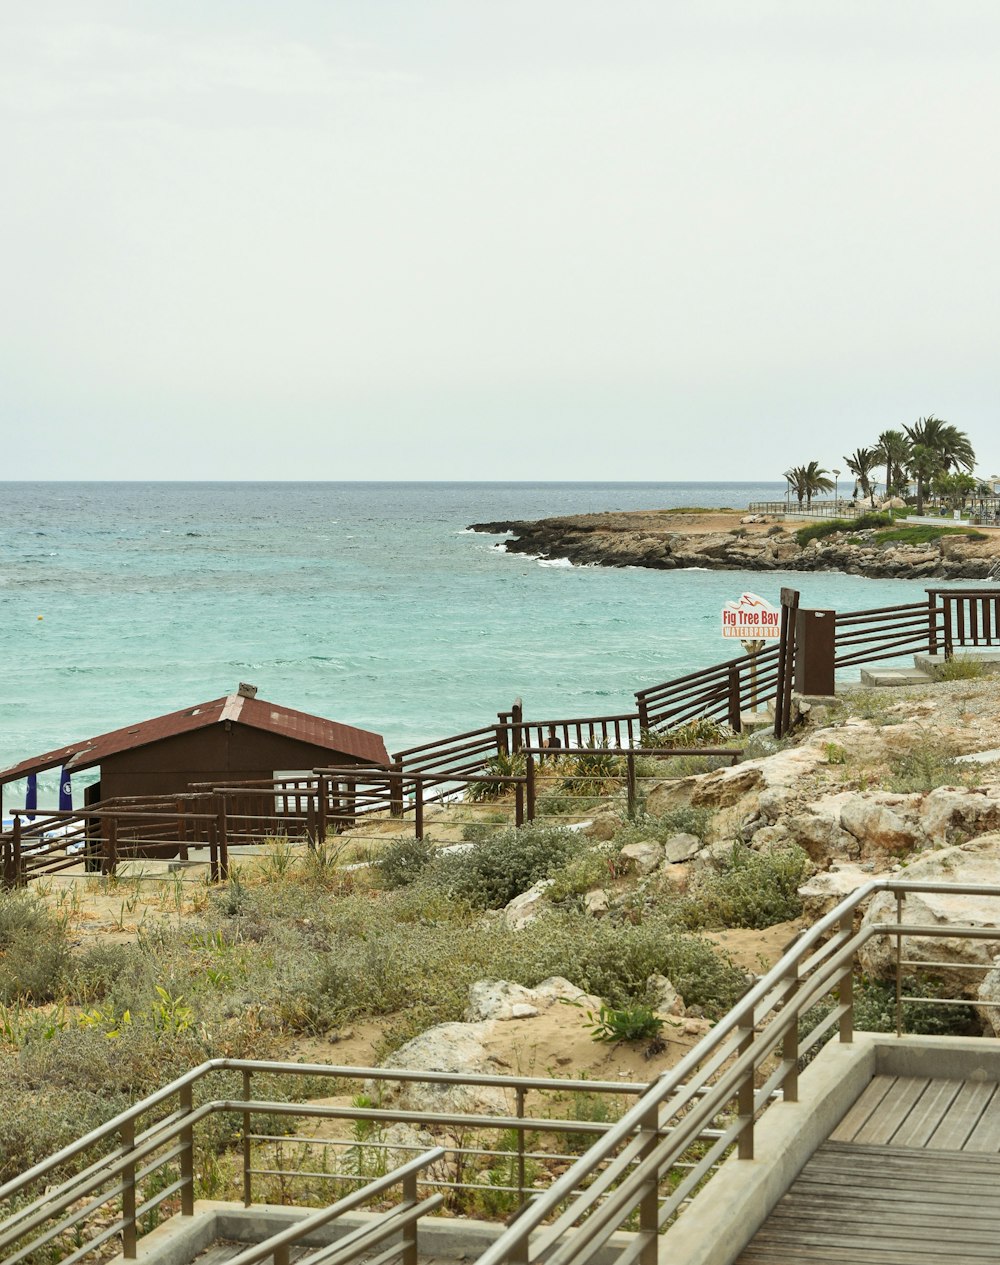 a wooden walkway leading to a beach next to the ocean